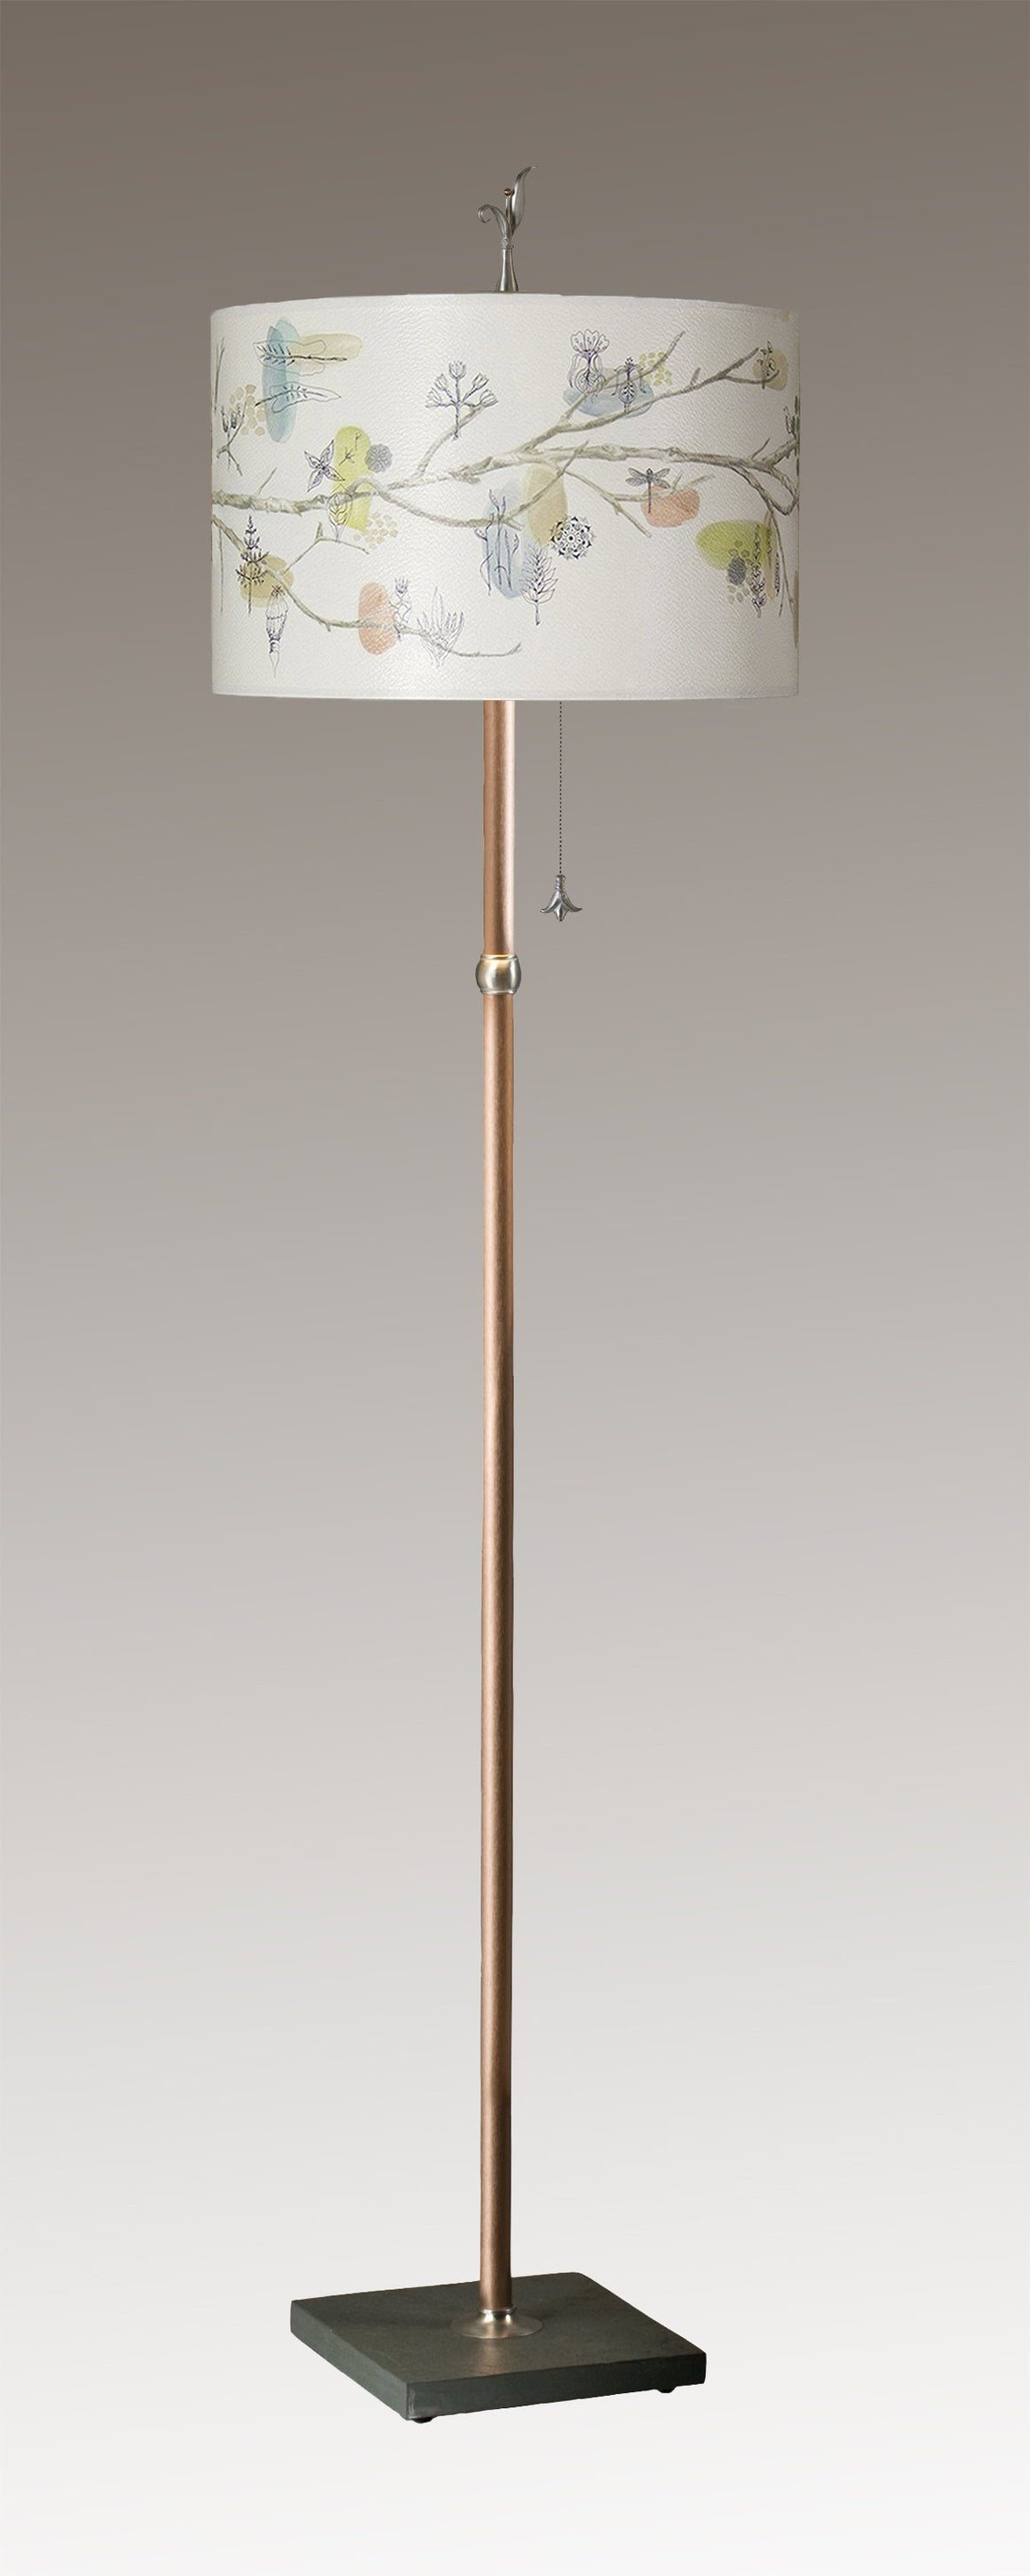 Copper Floor Lamp with Large Drum Shade in Artful Branch